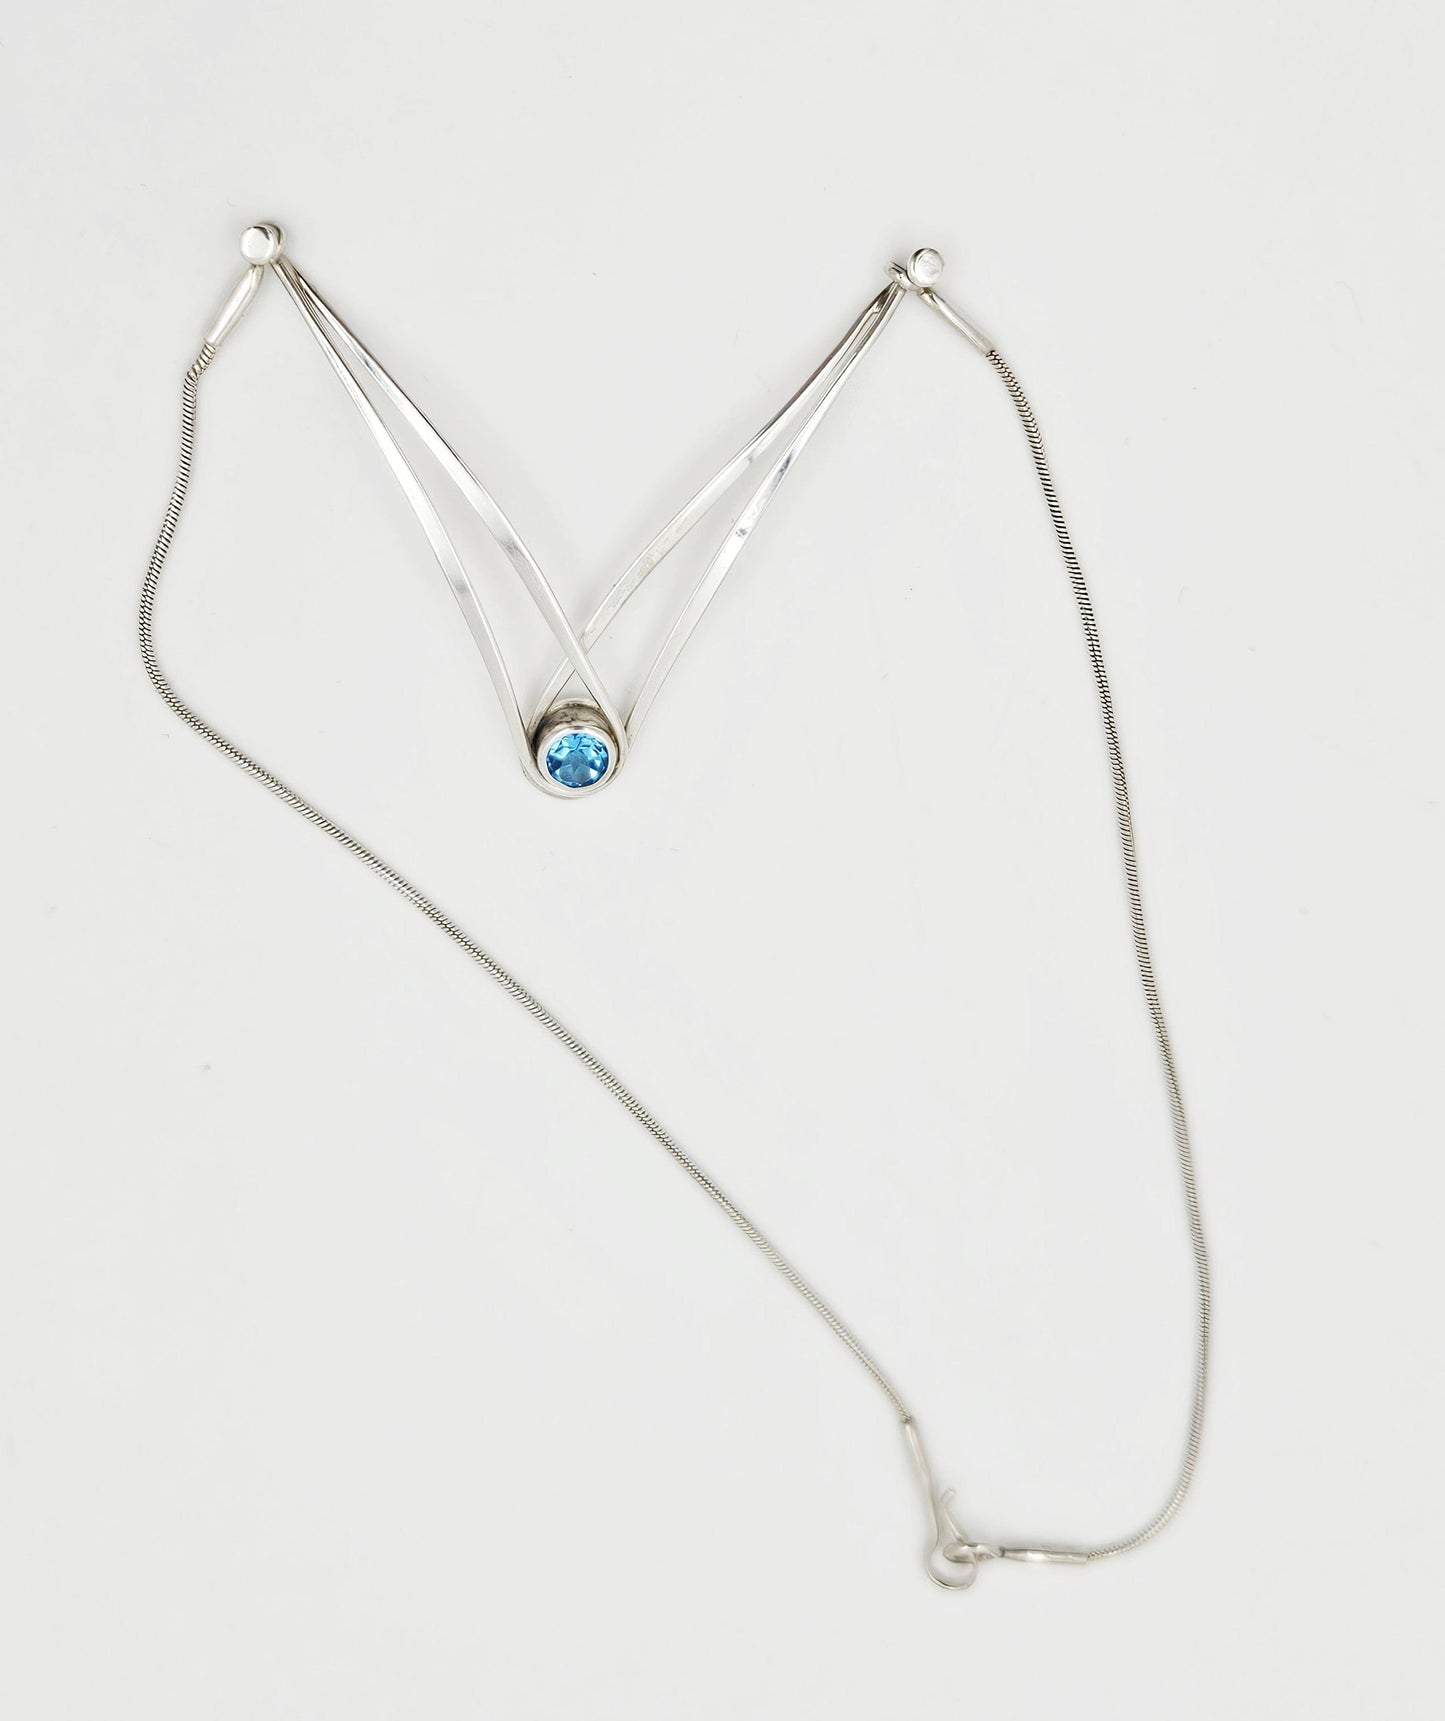 Ed Levin Jewelry Retired Ed Levin Modernist Articulating Sterling & Blue Topaz Y Necklace 1980s